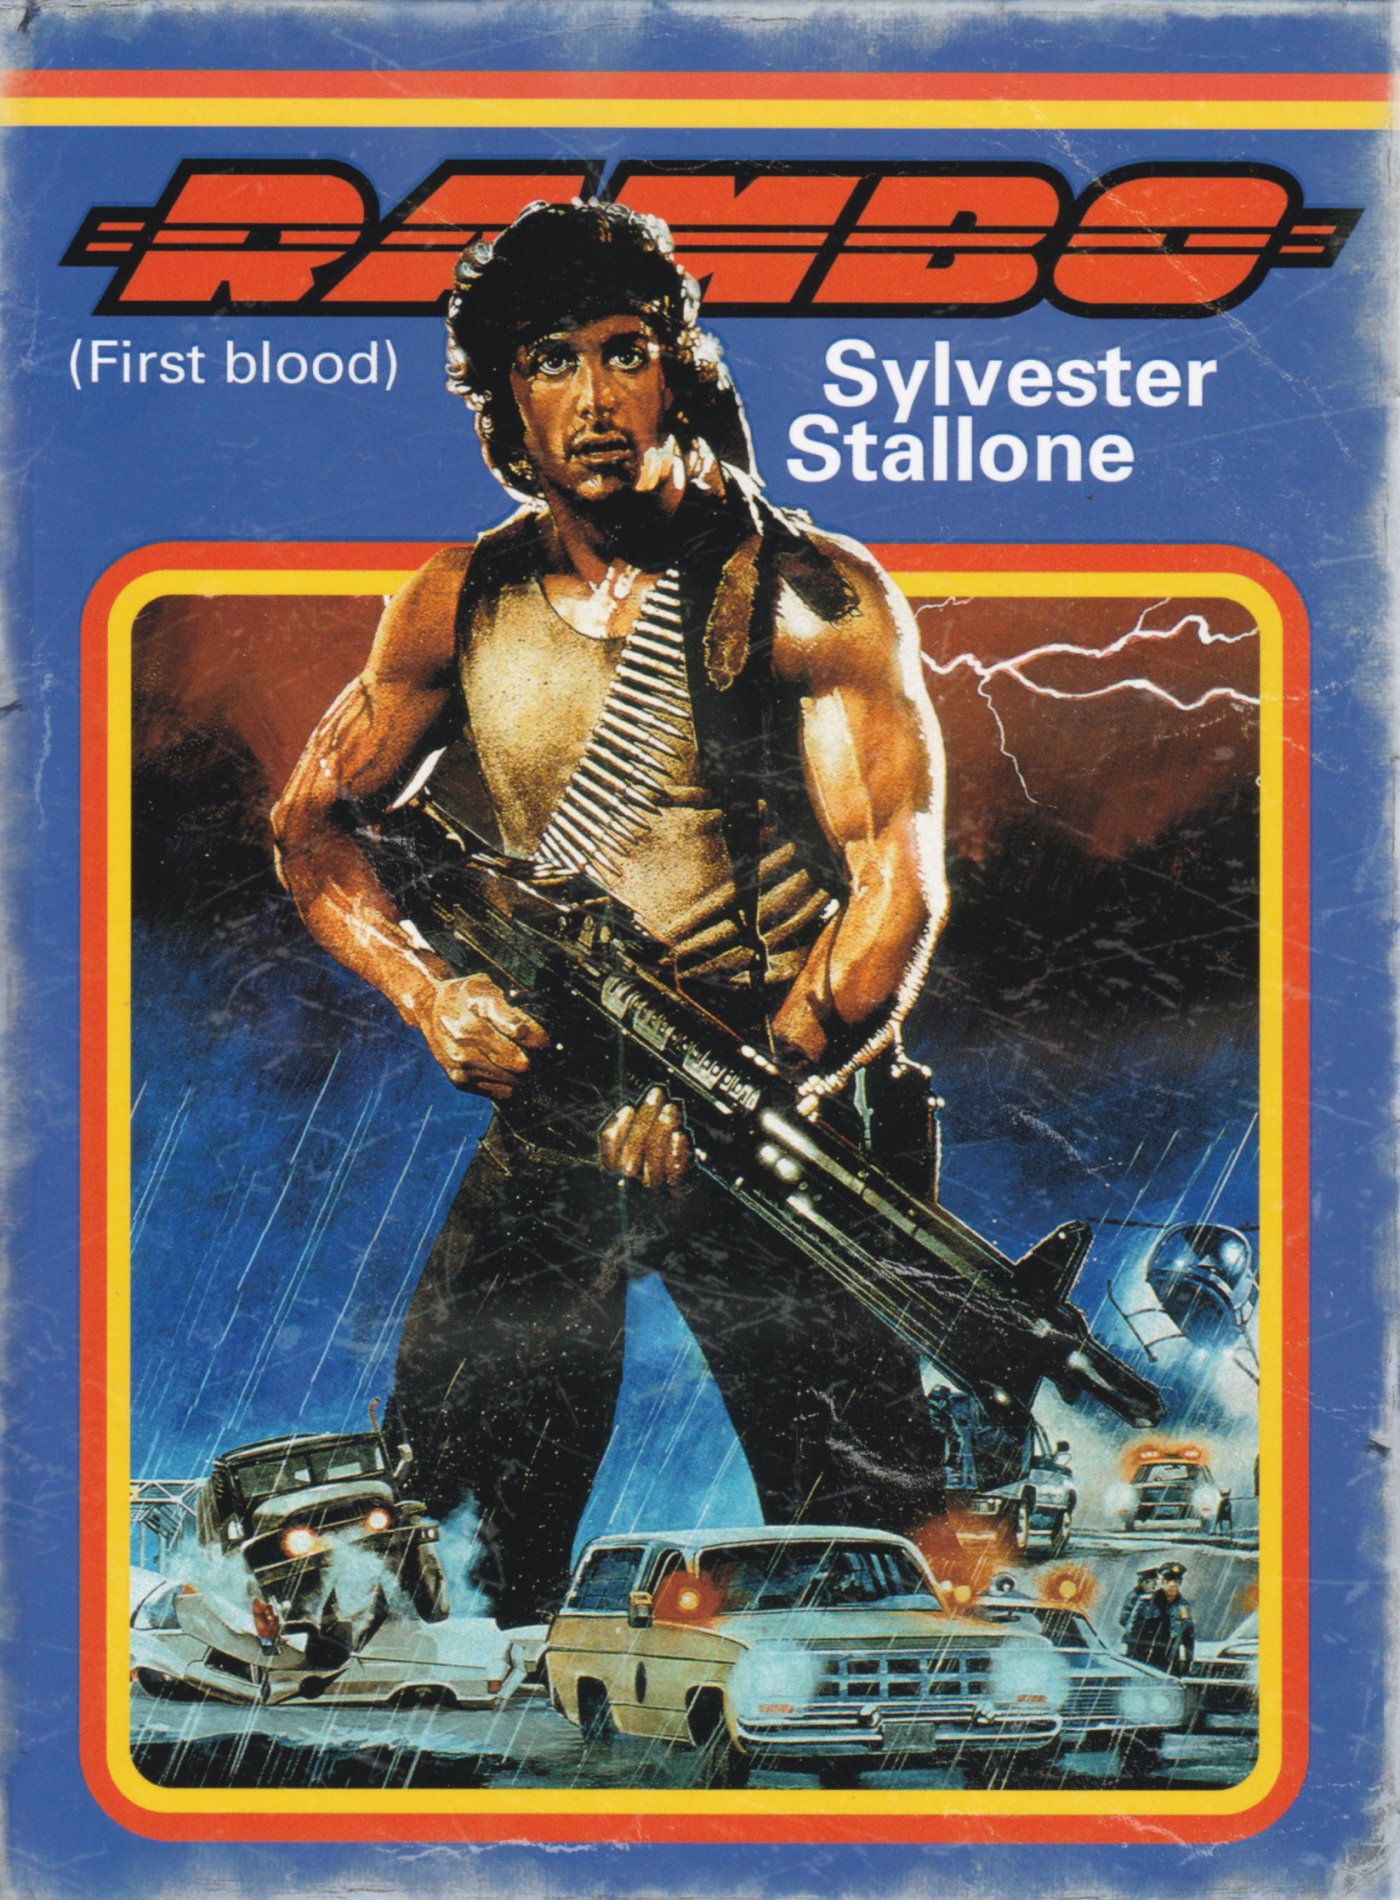 Cover - Rambo - First Blood.jpg